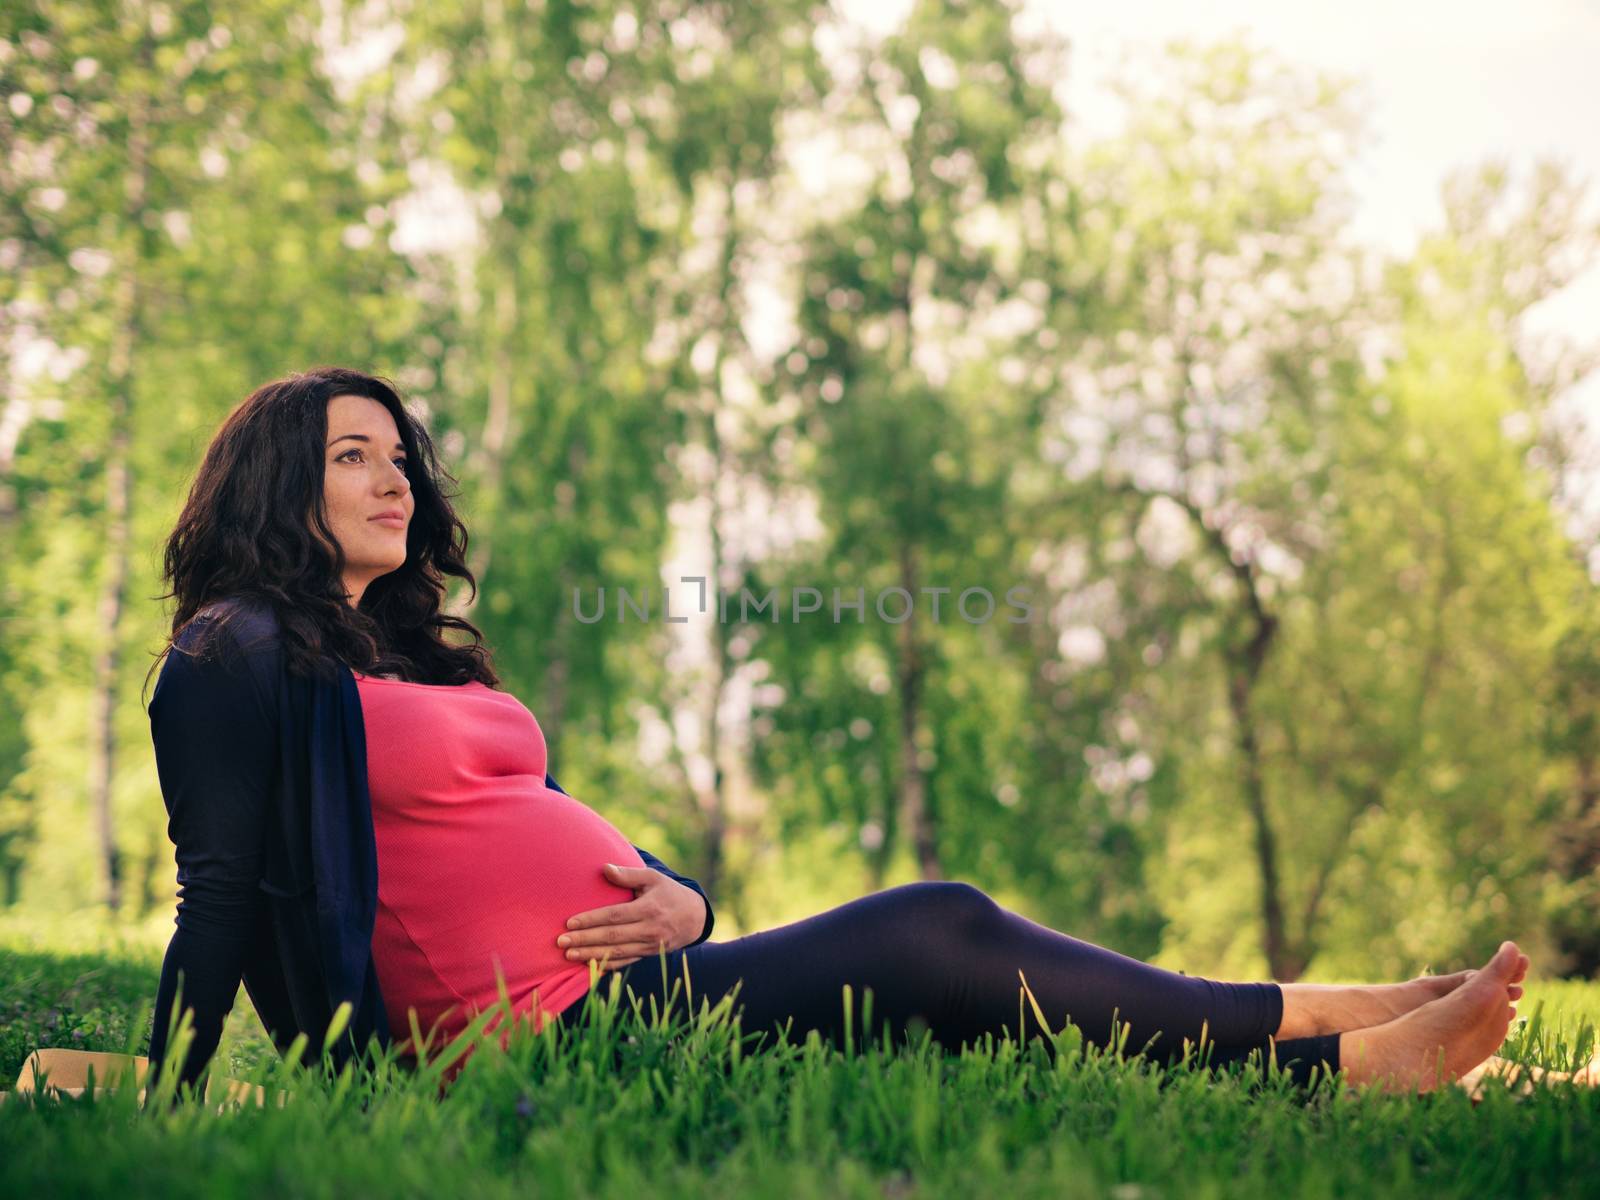 Pregnant woman sits in park, looking at sky. Full-length view of pregnant woman in profile. Copy space.